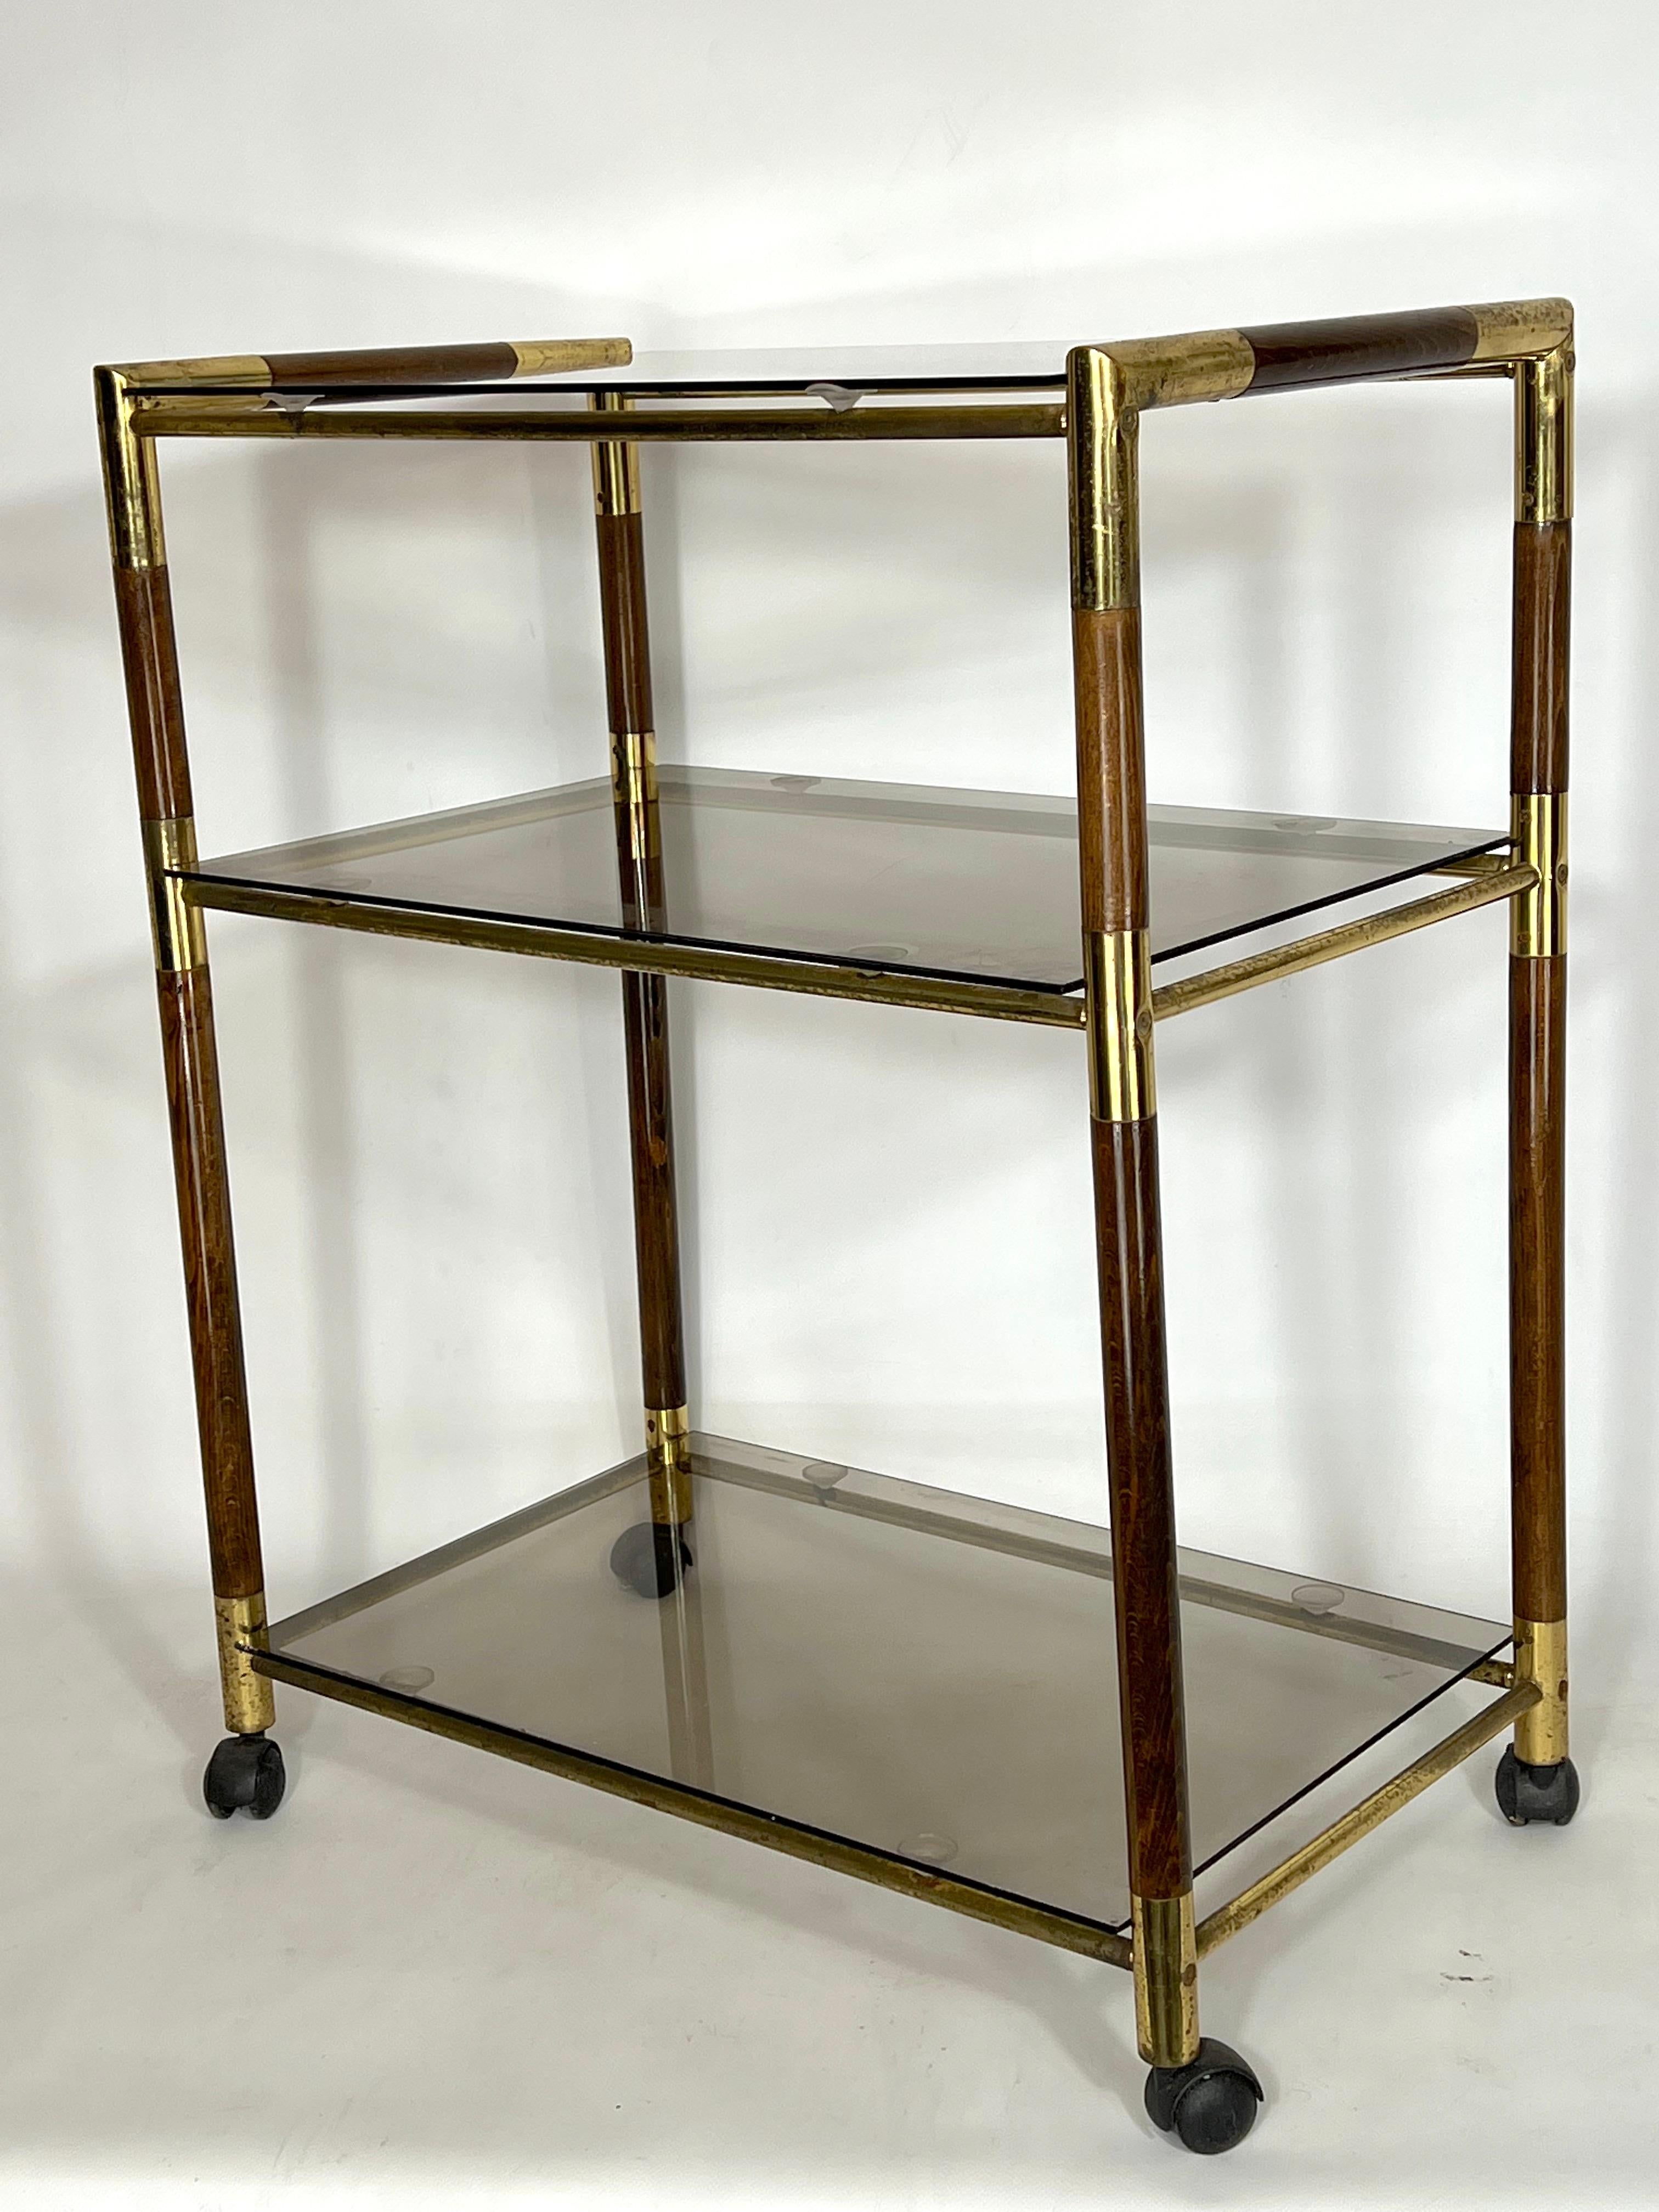 Italian Vintage Three Shelves Brass and Wood Trolley or Bar Cart by Tommaso Barbi, 1970s For Sale